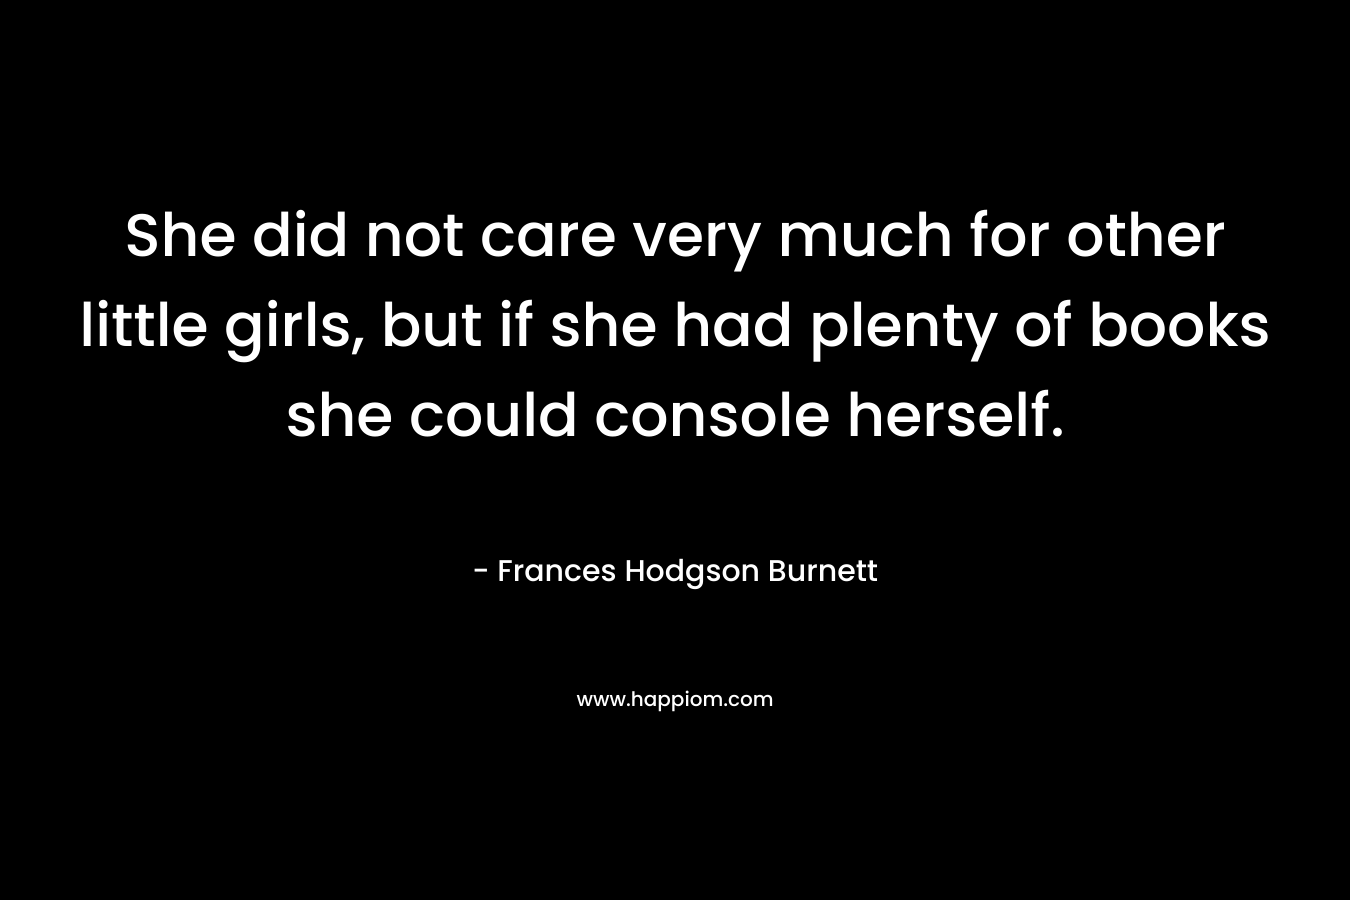 She did not care very much for other little girls, but if she had plenty of books she could console herself. – Frances Hodgson Burnett